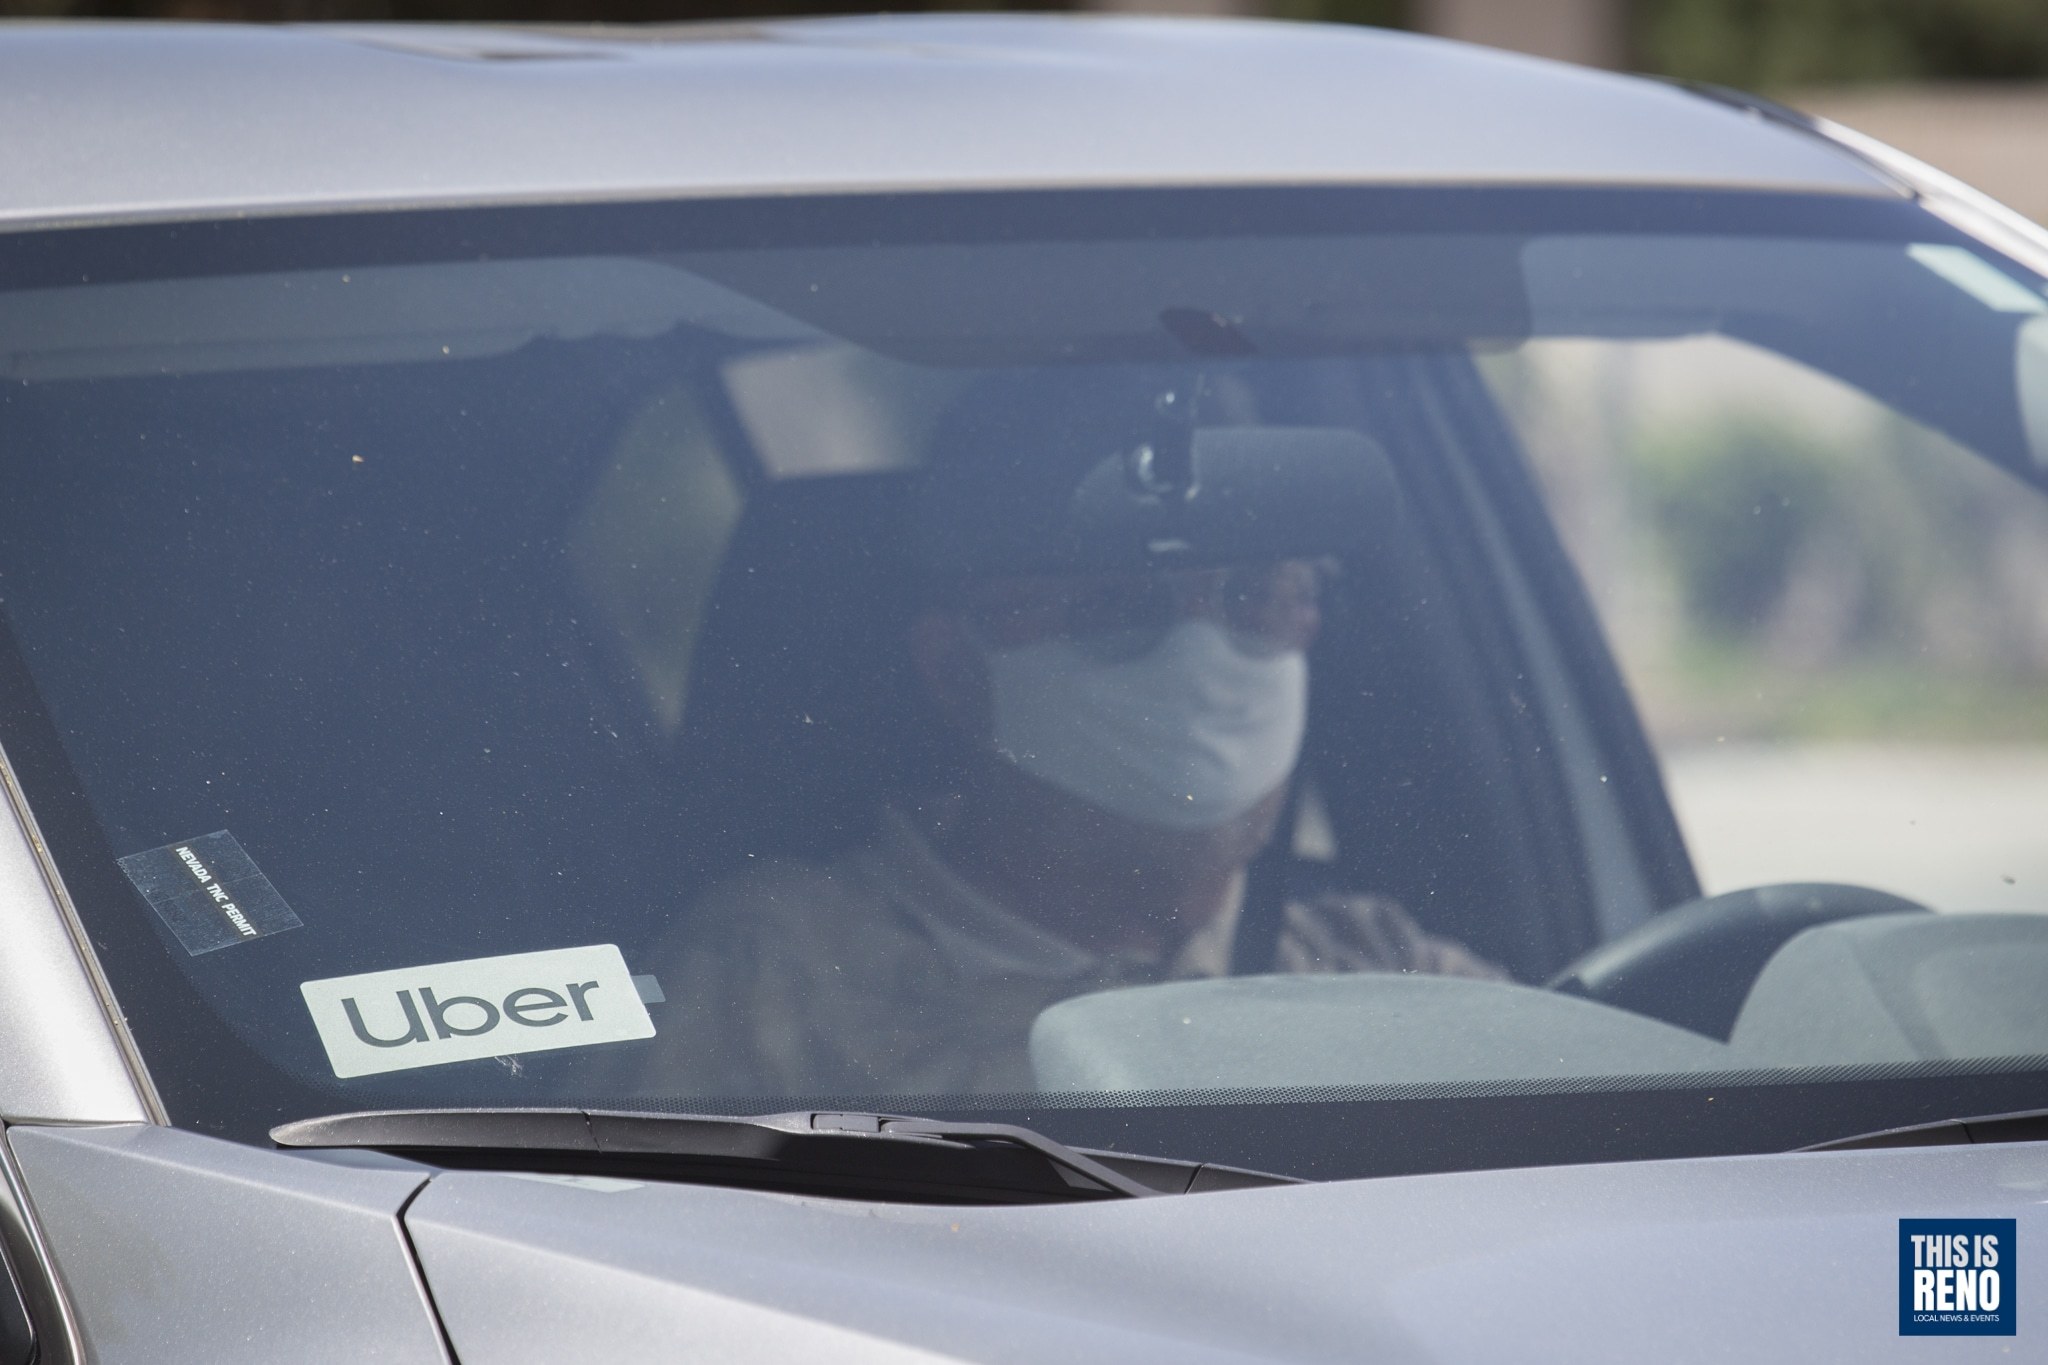 An Uber driver wearing a mask while working.